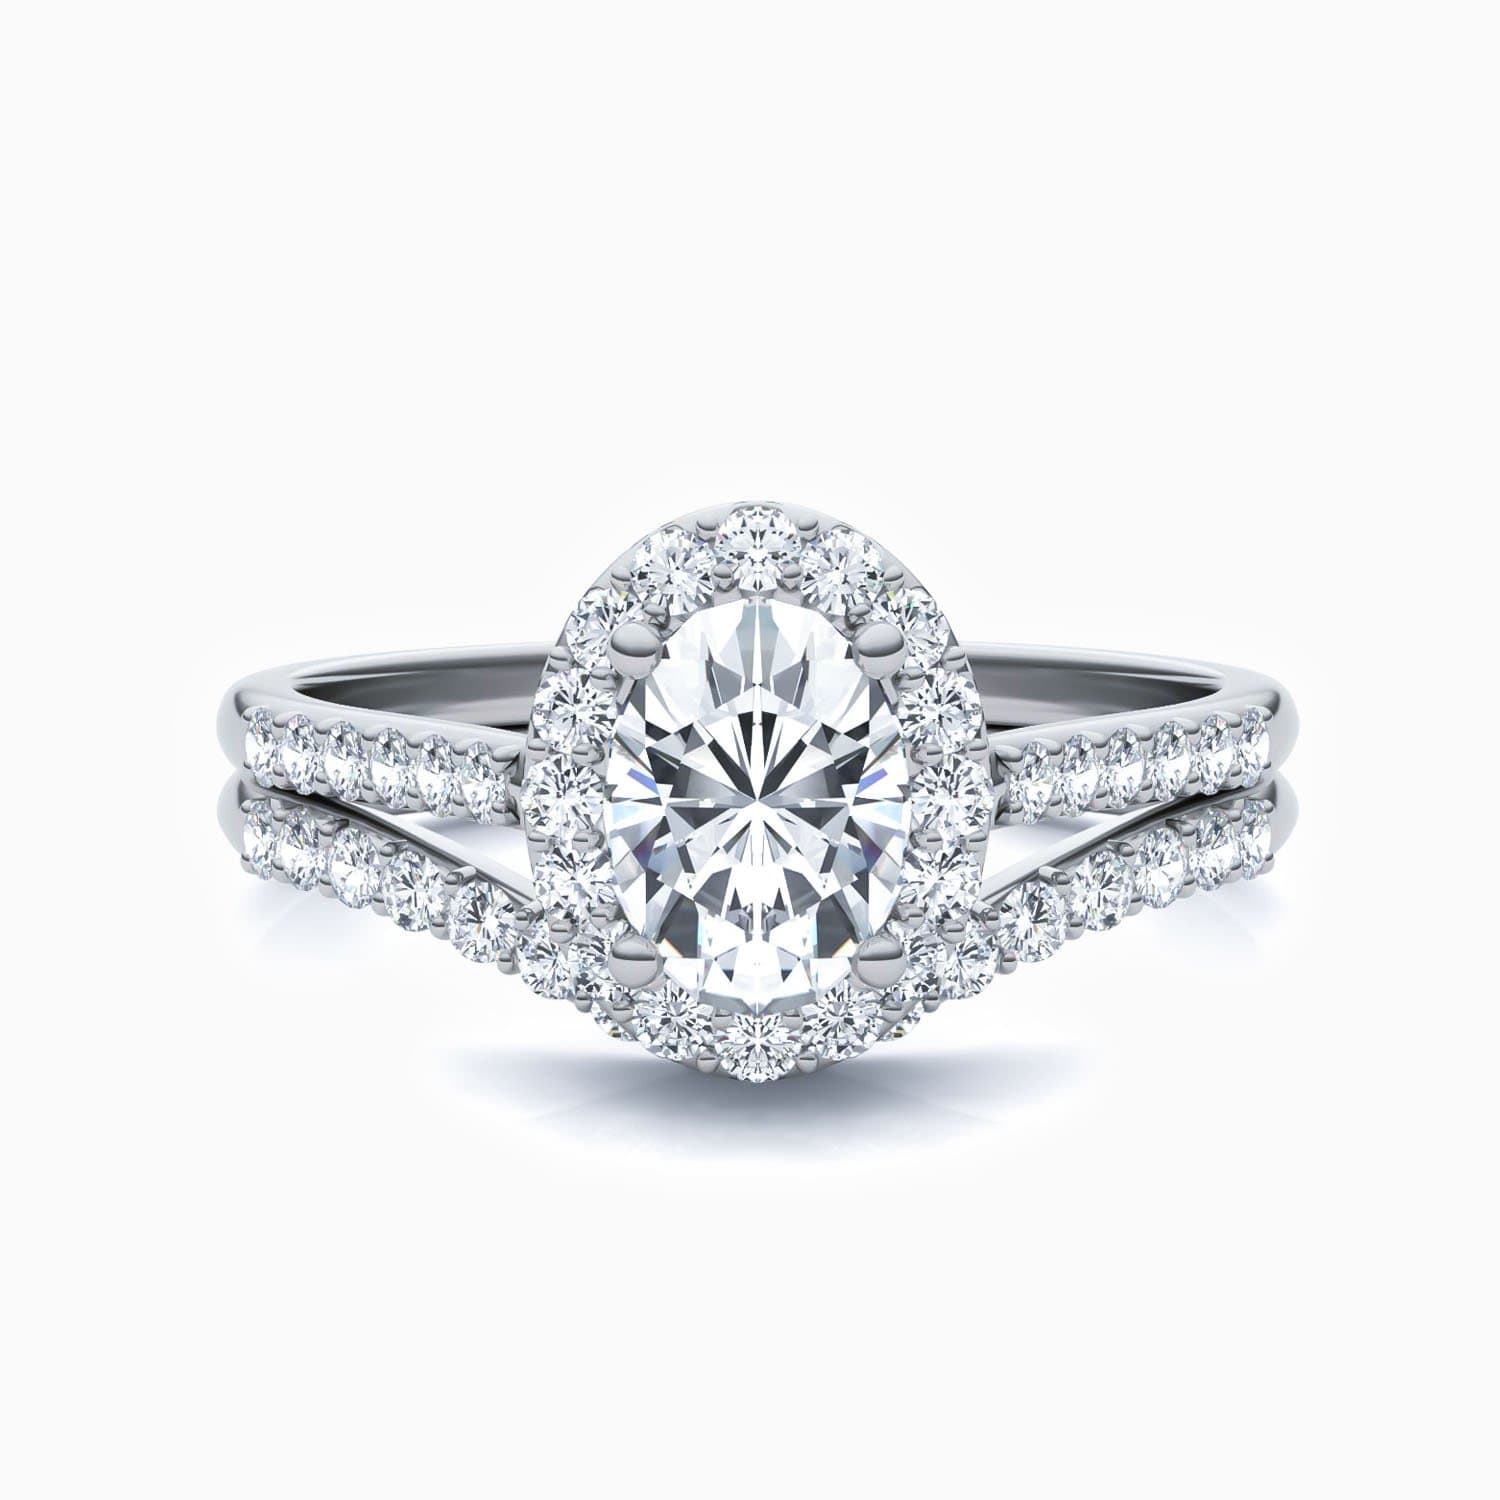 D Grade Promise Engagment Wedding Moissanite Bridal Sets Oval Solitaire Rings Micro Pave With Side Stones 1.36 Carat